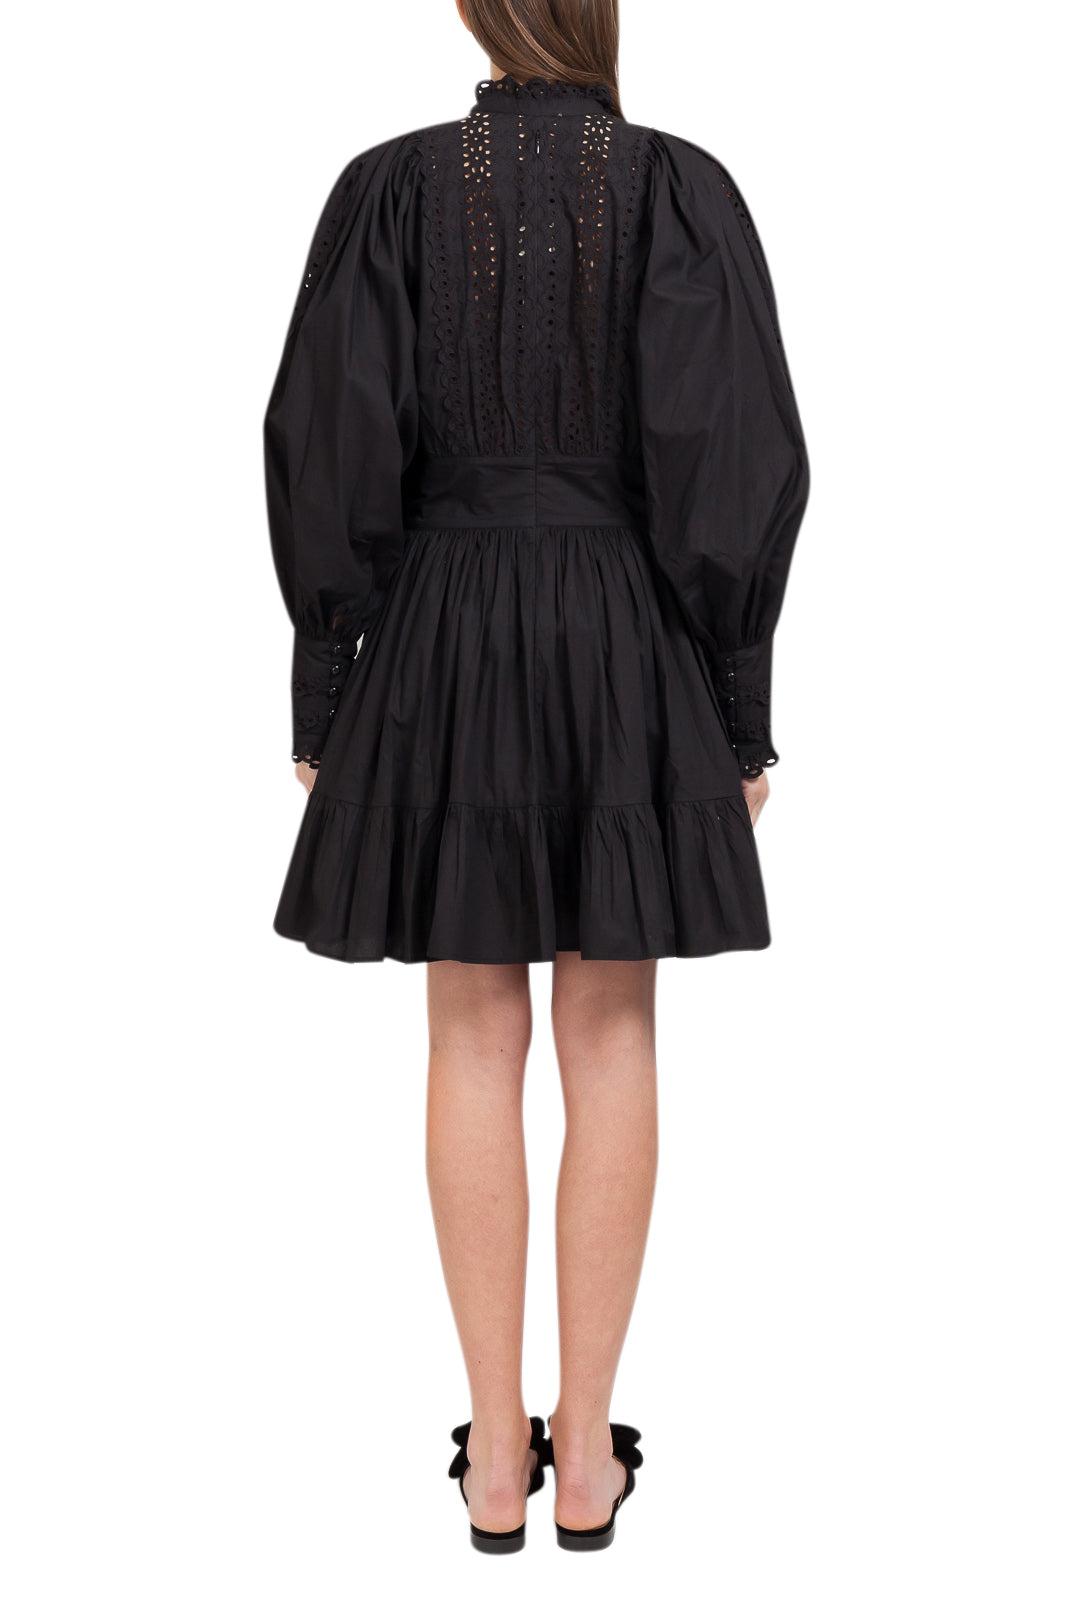 By Timo-Ruffled over-fit midi-dress-dgallerystore